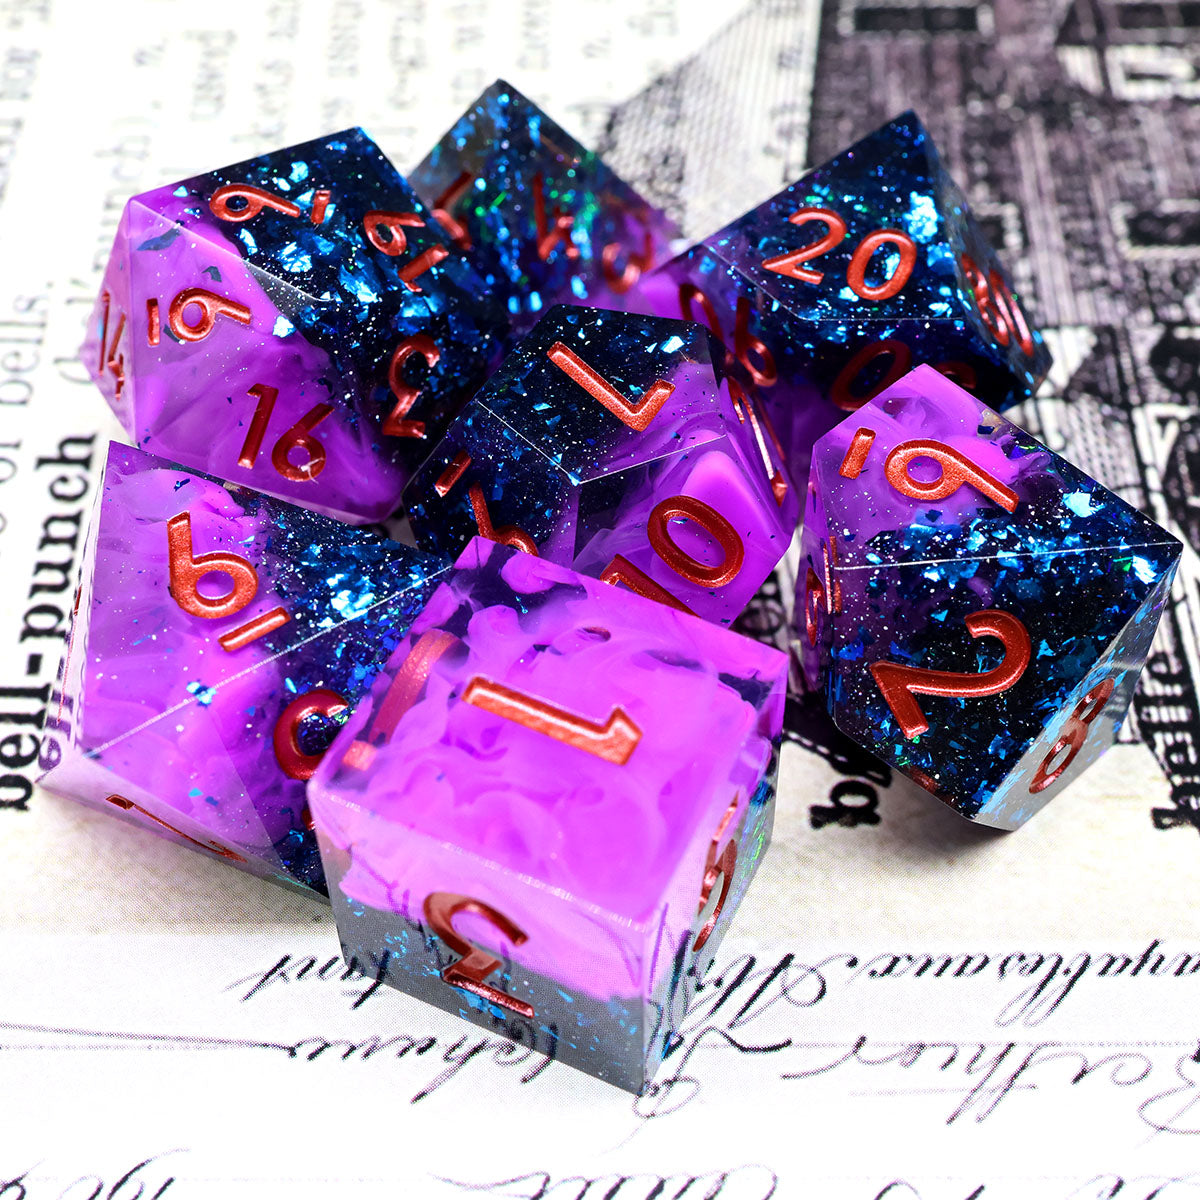 sharp edge dnd TTRPG, dice set for role playing games and dice goblin collectors